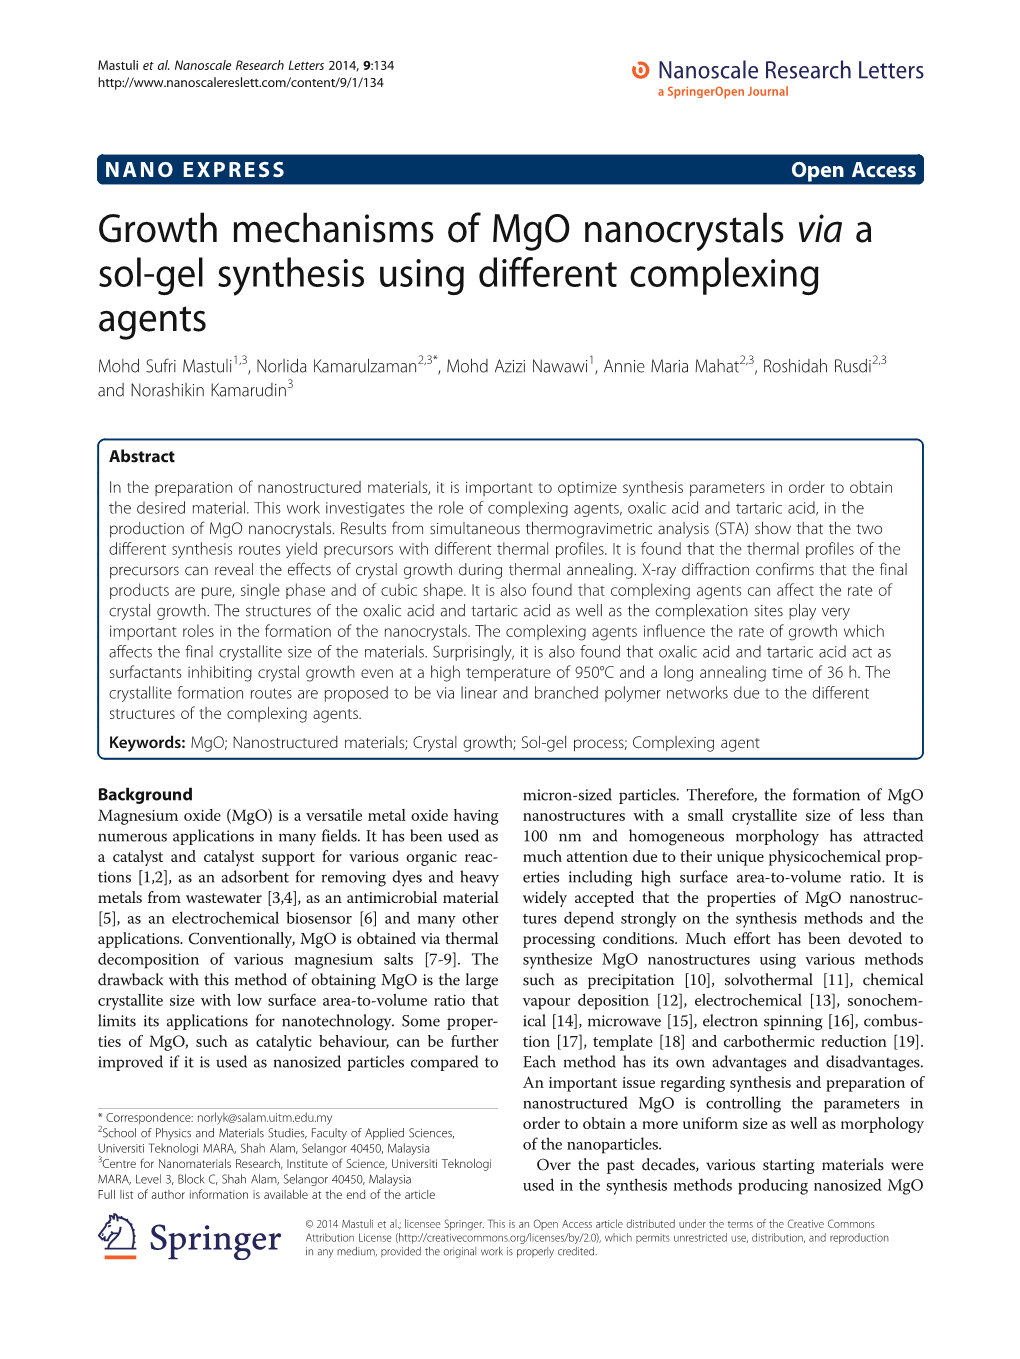 Growth Mechanisms of Mgo Nanocrystals Via a Sol-Gel Synthesis